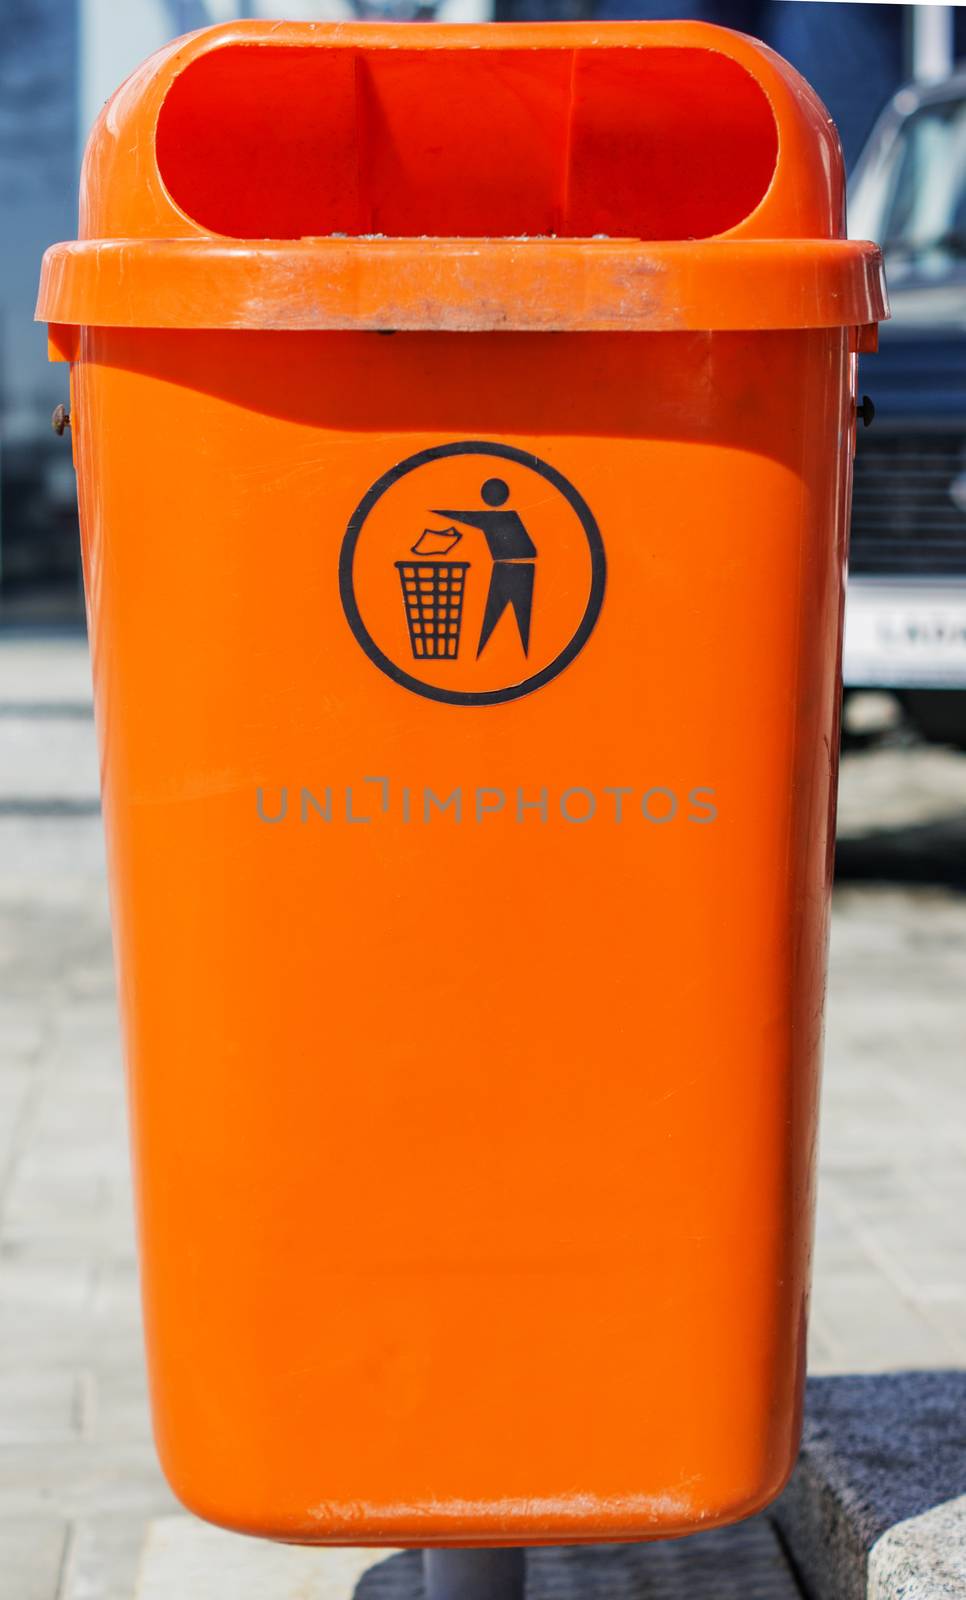 Recycle bin. For your commercial and editorial use.